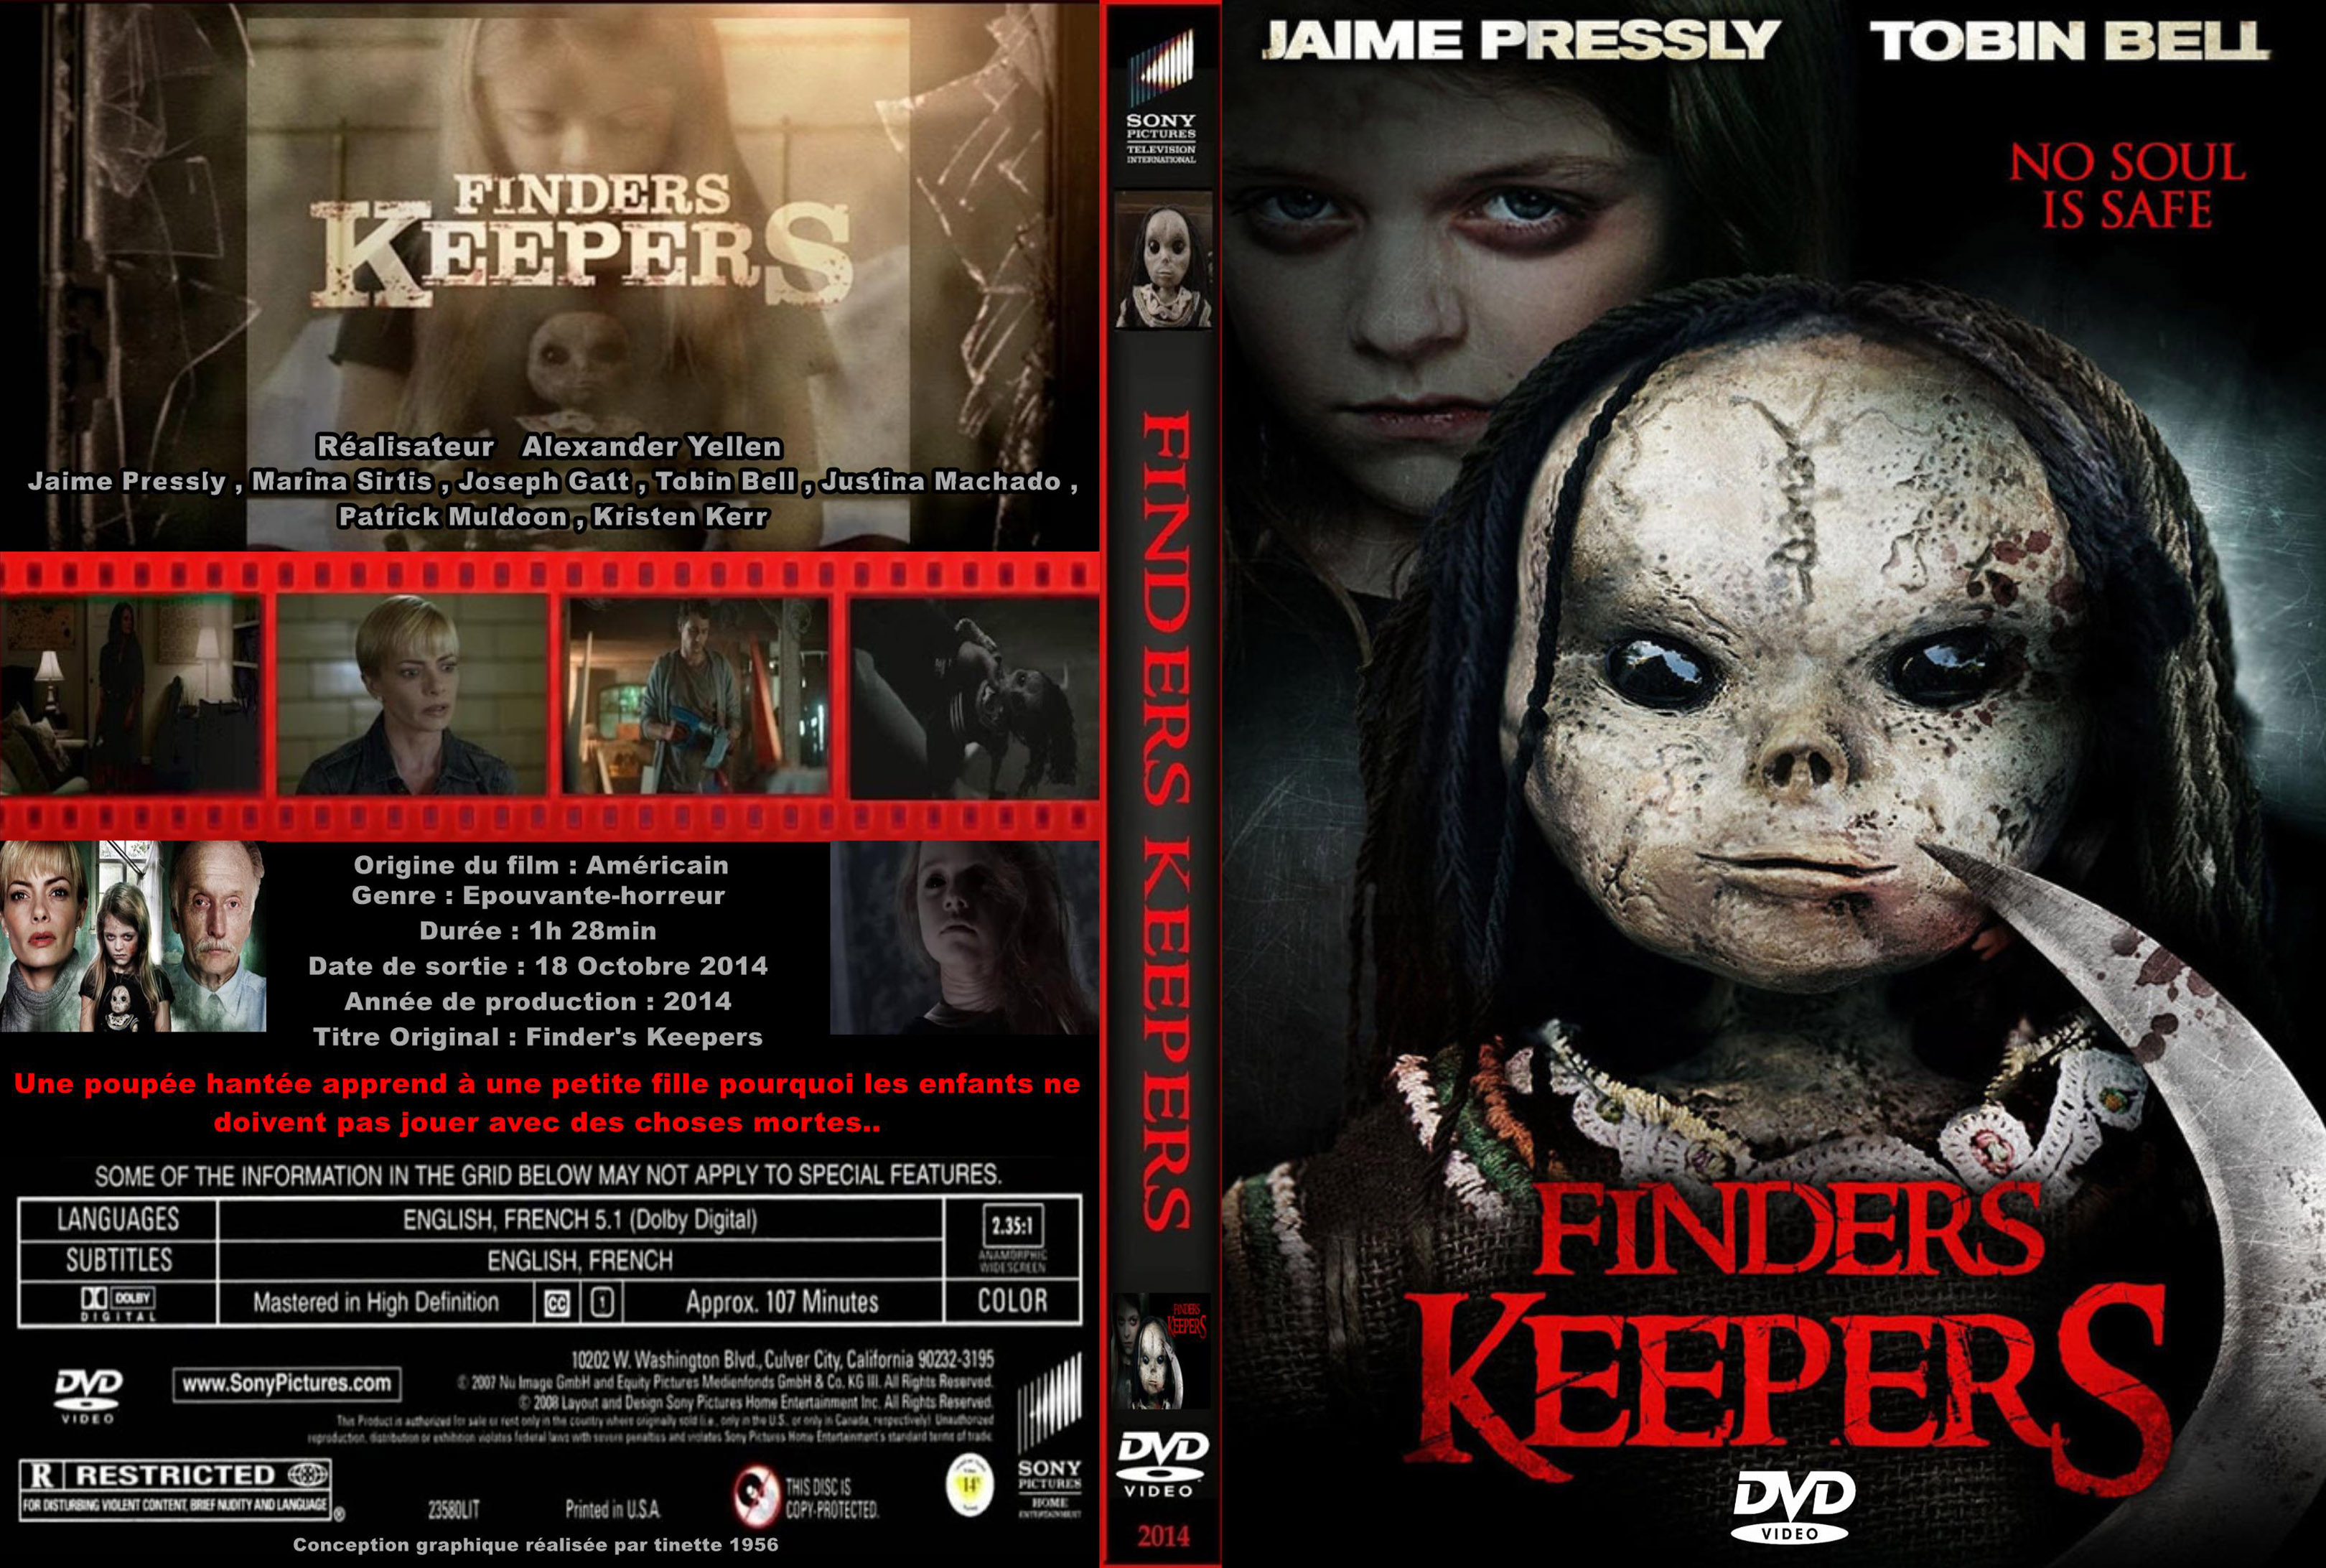 Jaquette DVD finders keepers (2014) custom